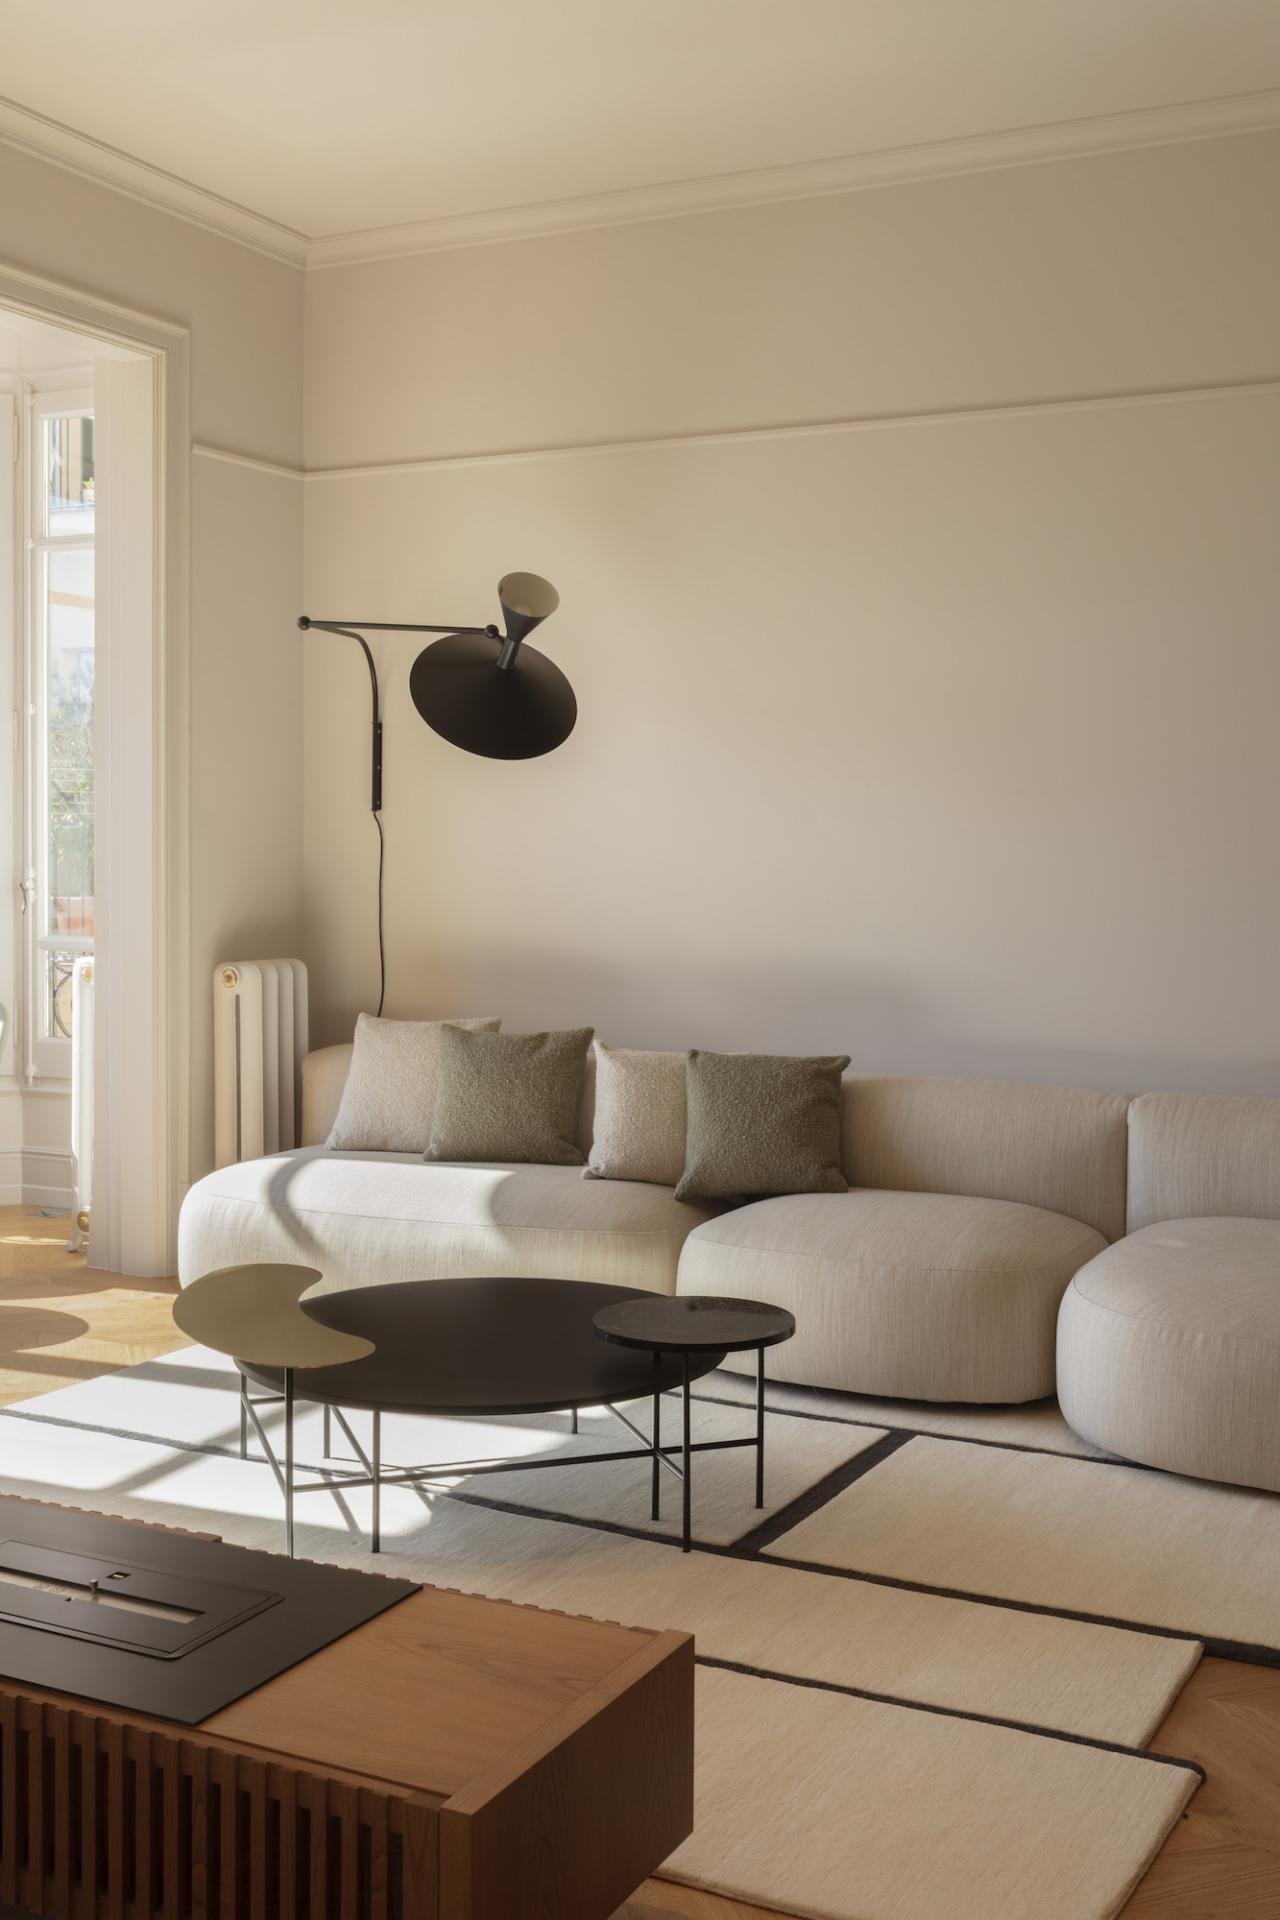 This Barcelona Apartment is an Ode to the Relaxed Mediterranean Spirit 